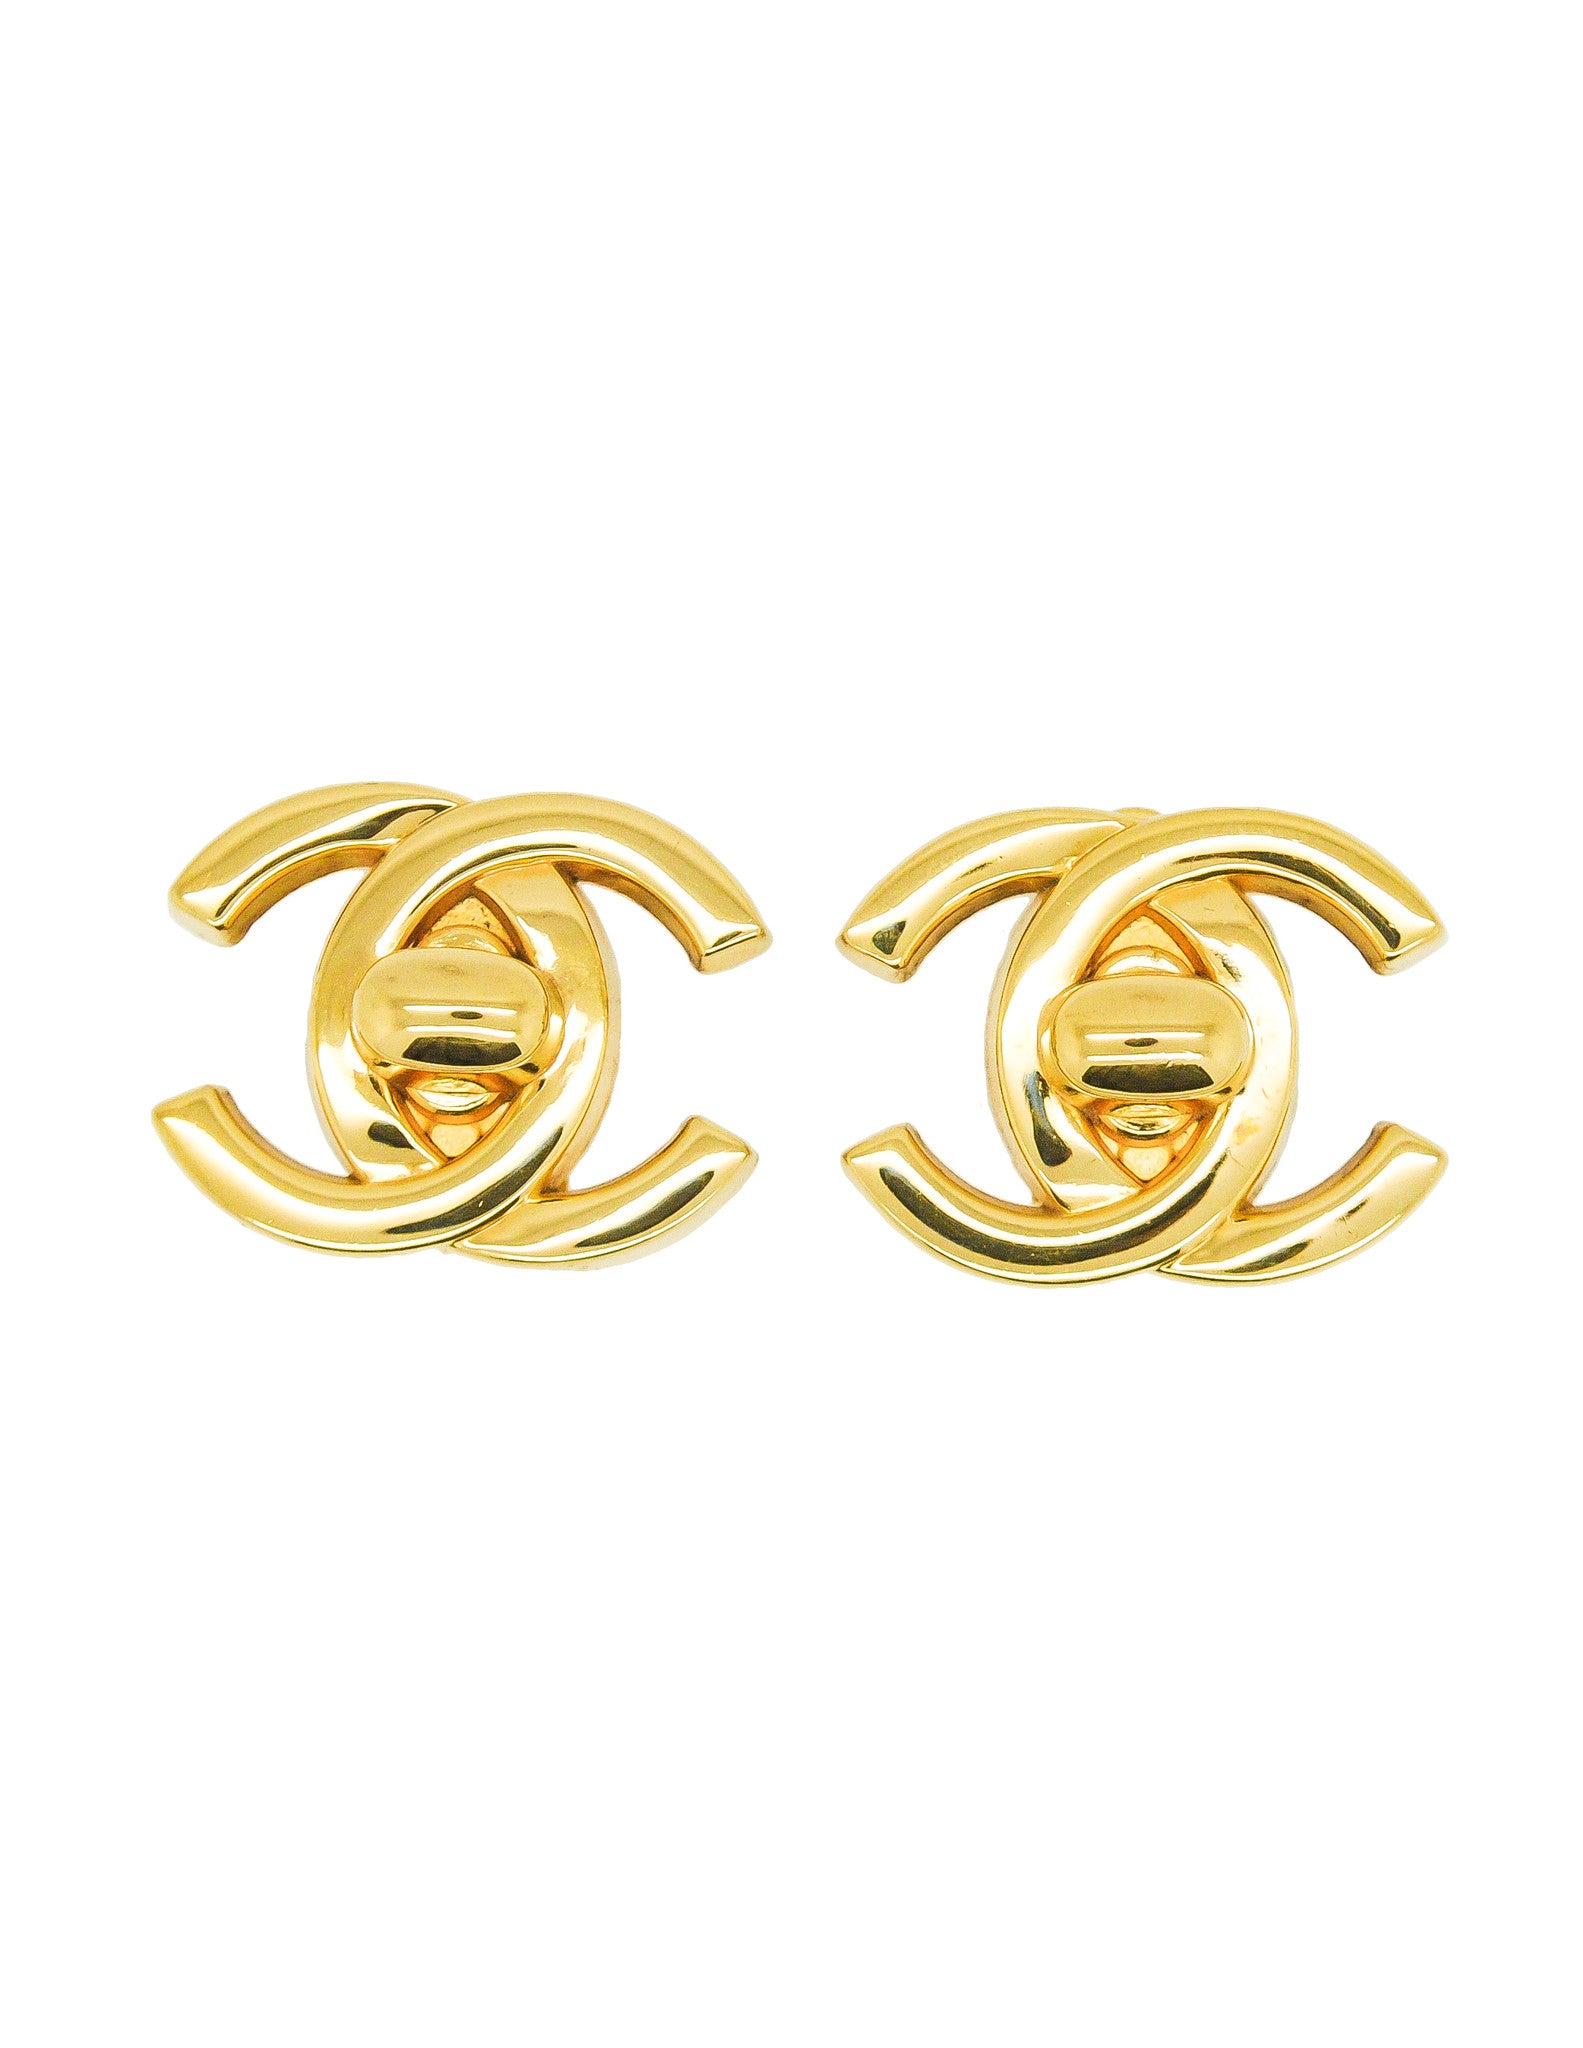 Chanel Vintage Turn Lock CC Clasp Earrings - from Amarcord Vintage Fashion